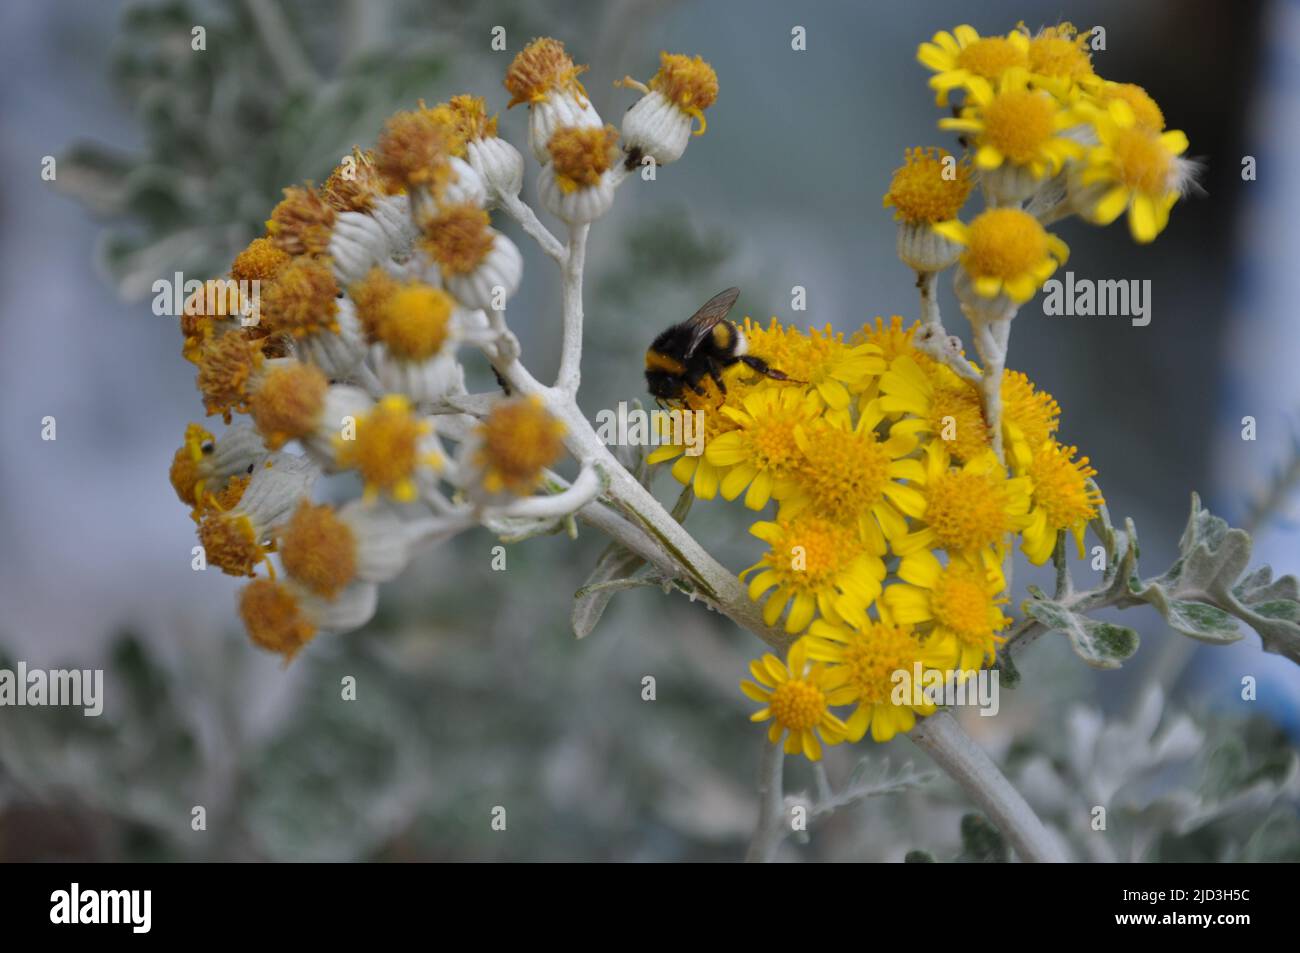 Bumble bee enjoying the Silver ragwort (Jacobaea maritima).Bee perched on yellow flower with green leaves background Stock Photo